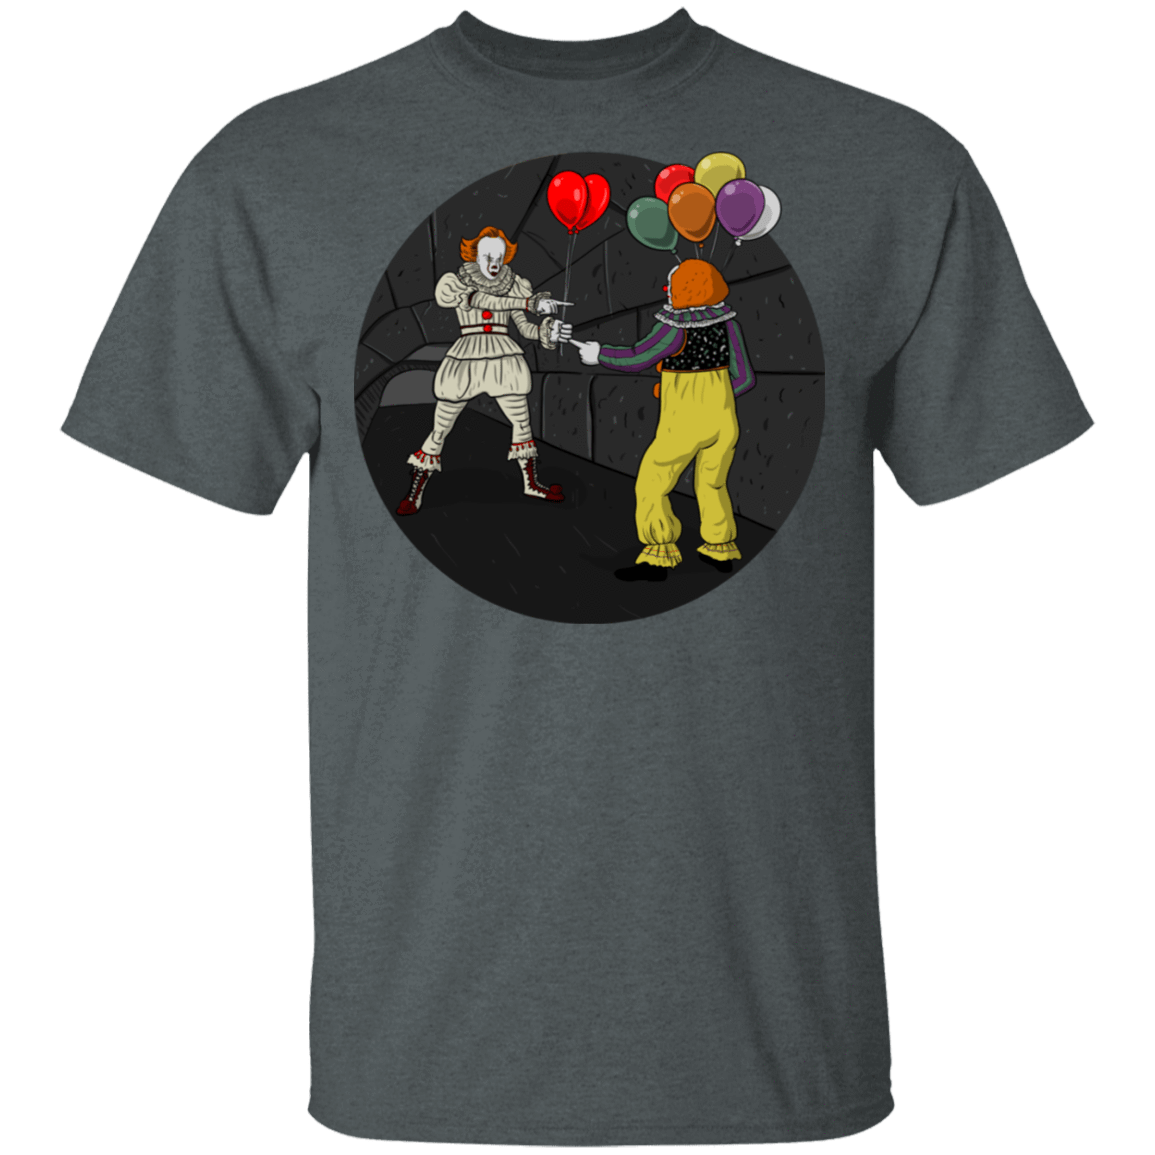 T-Shirts Dark Heather / S 2 Pennywise T-Shirt